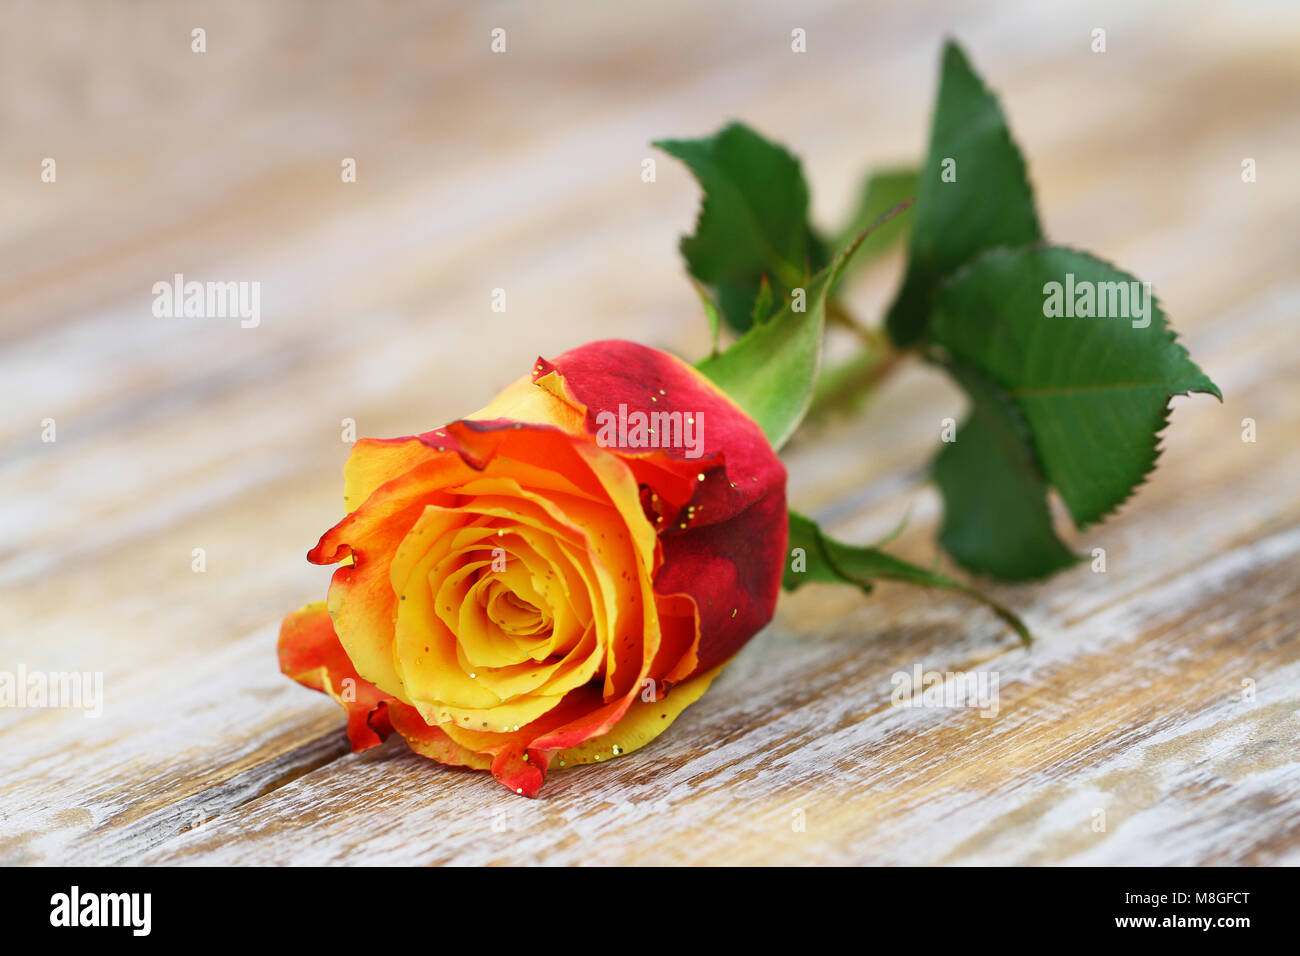 Red and yellow rose with glitter on rustic wooden surface with copy space Stock Photo